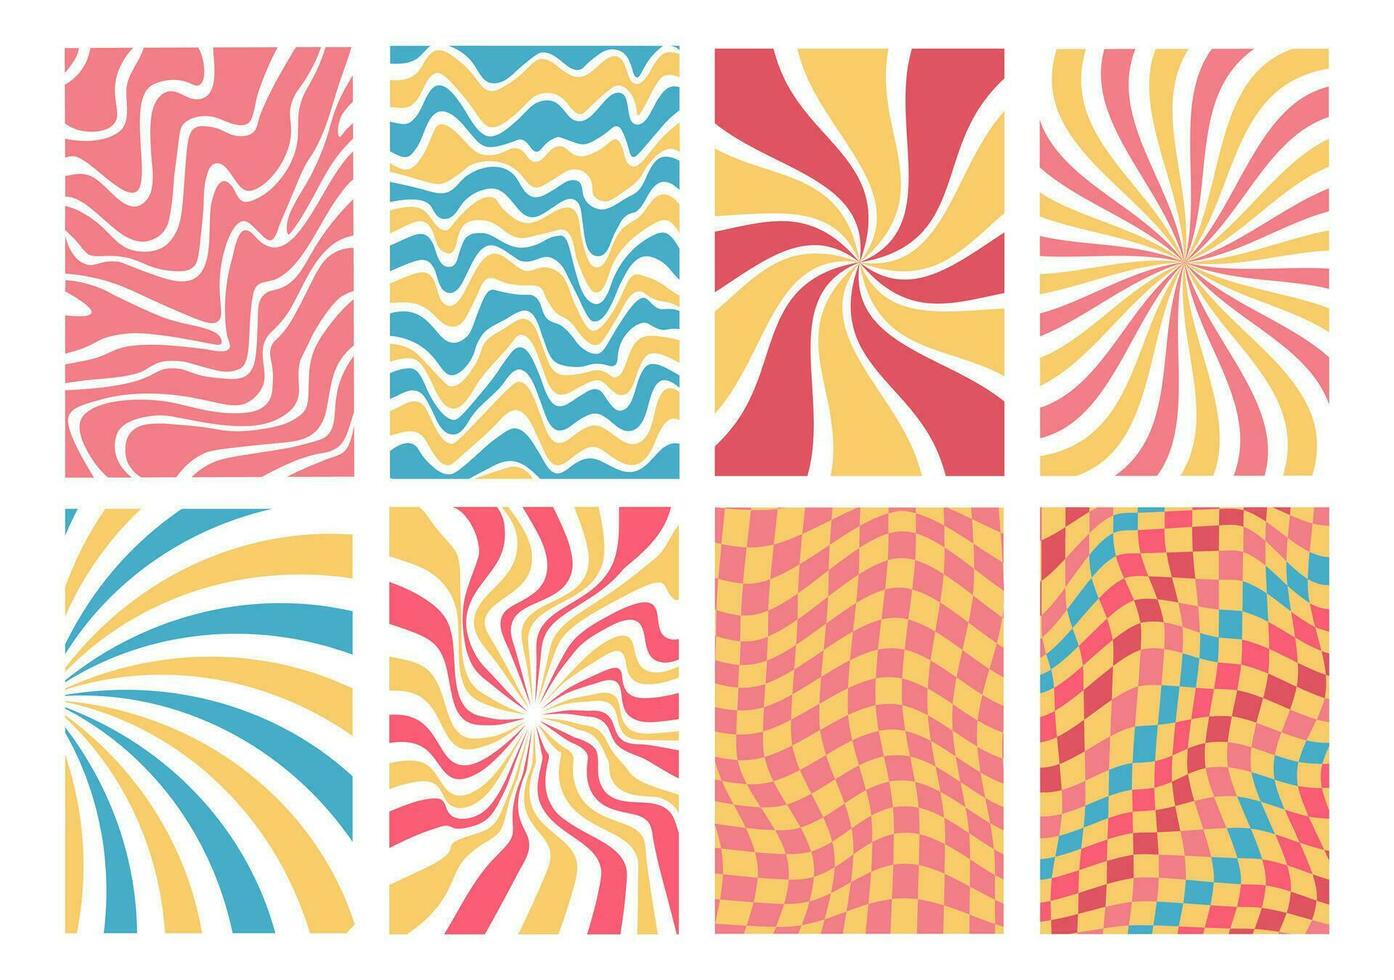 Groovy hippie 70s backgrounds. Checkerboard,waves patterns. Y2K retro psychedelic. Vector illustration